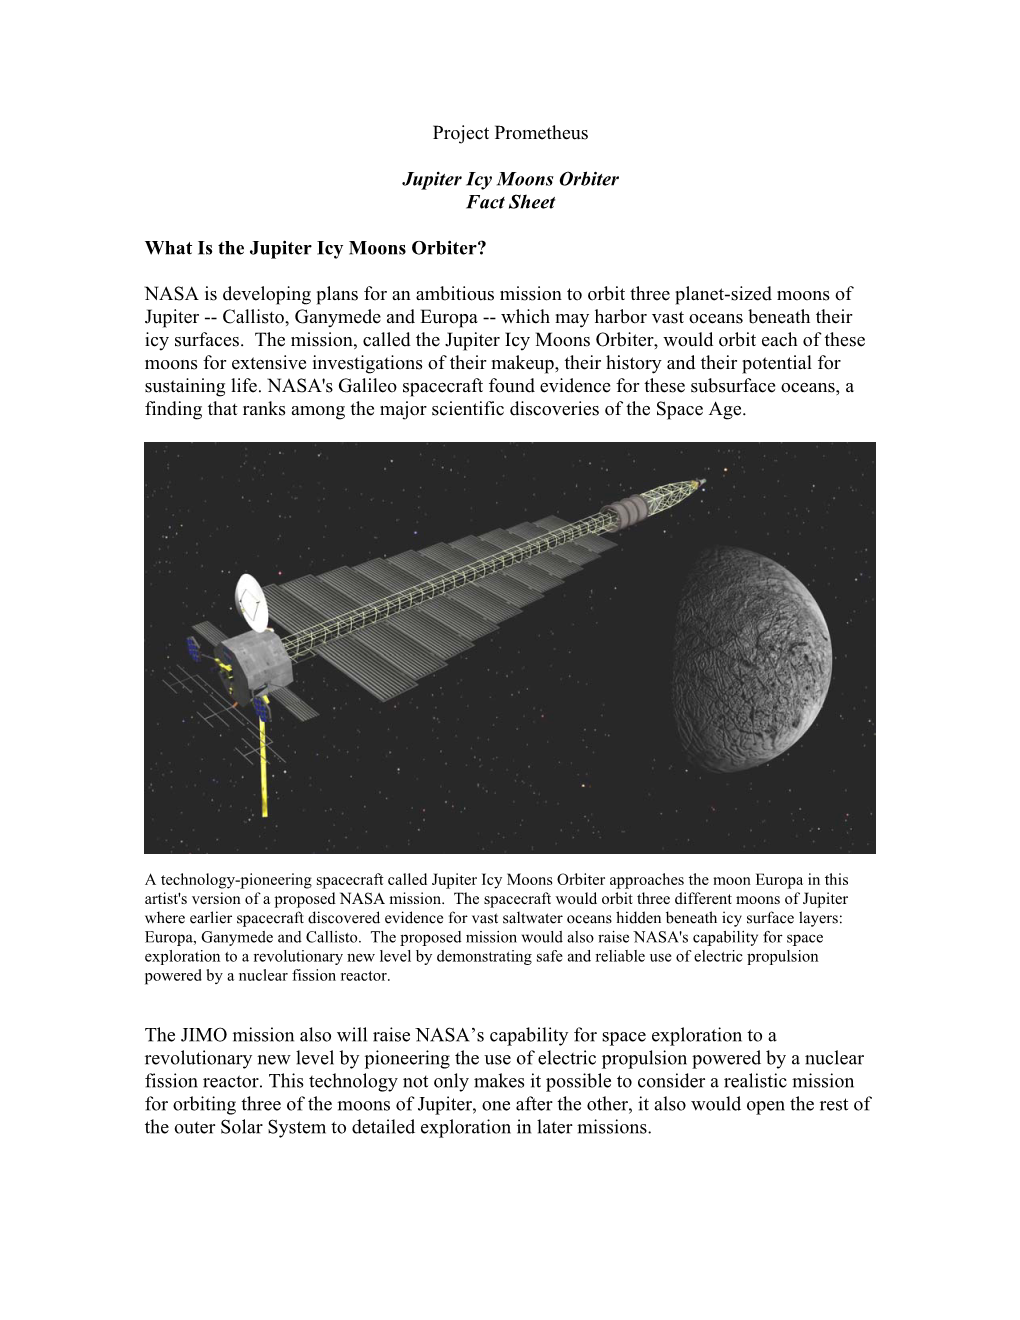 Project Prometheus Jupiter Icy Moons Orbiter Fact Sheet What Is The